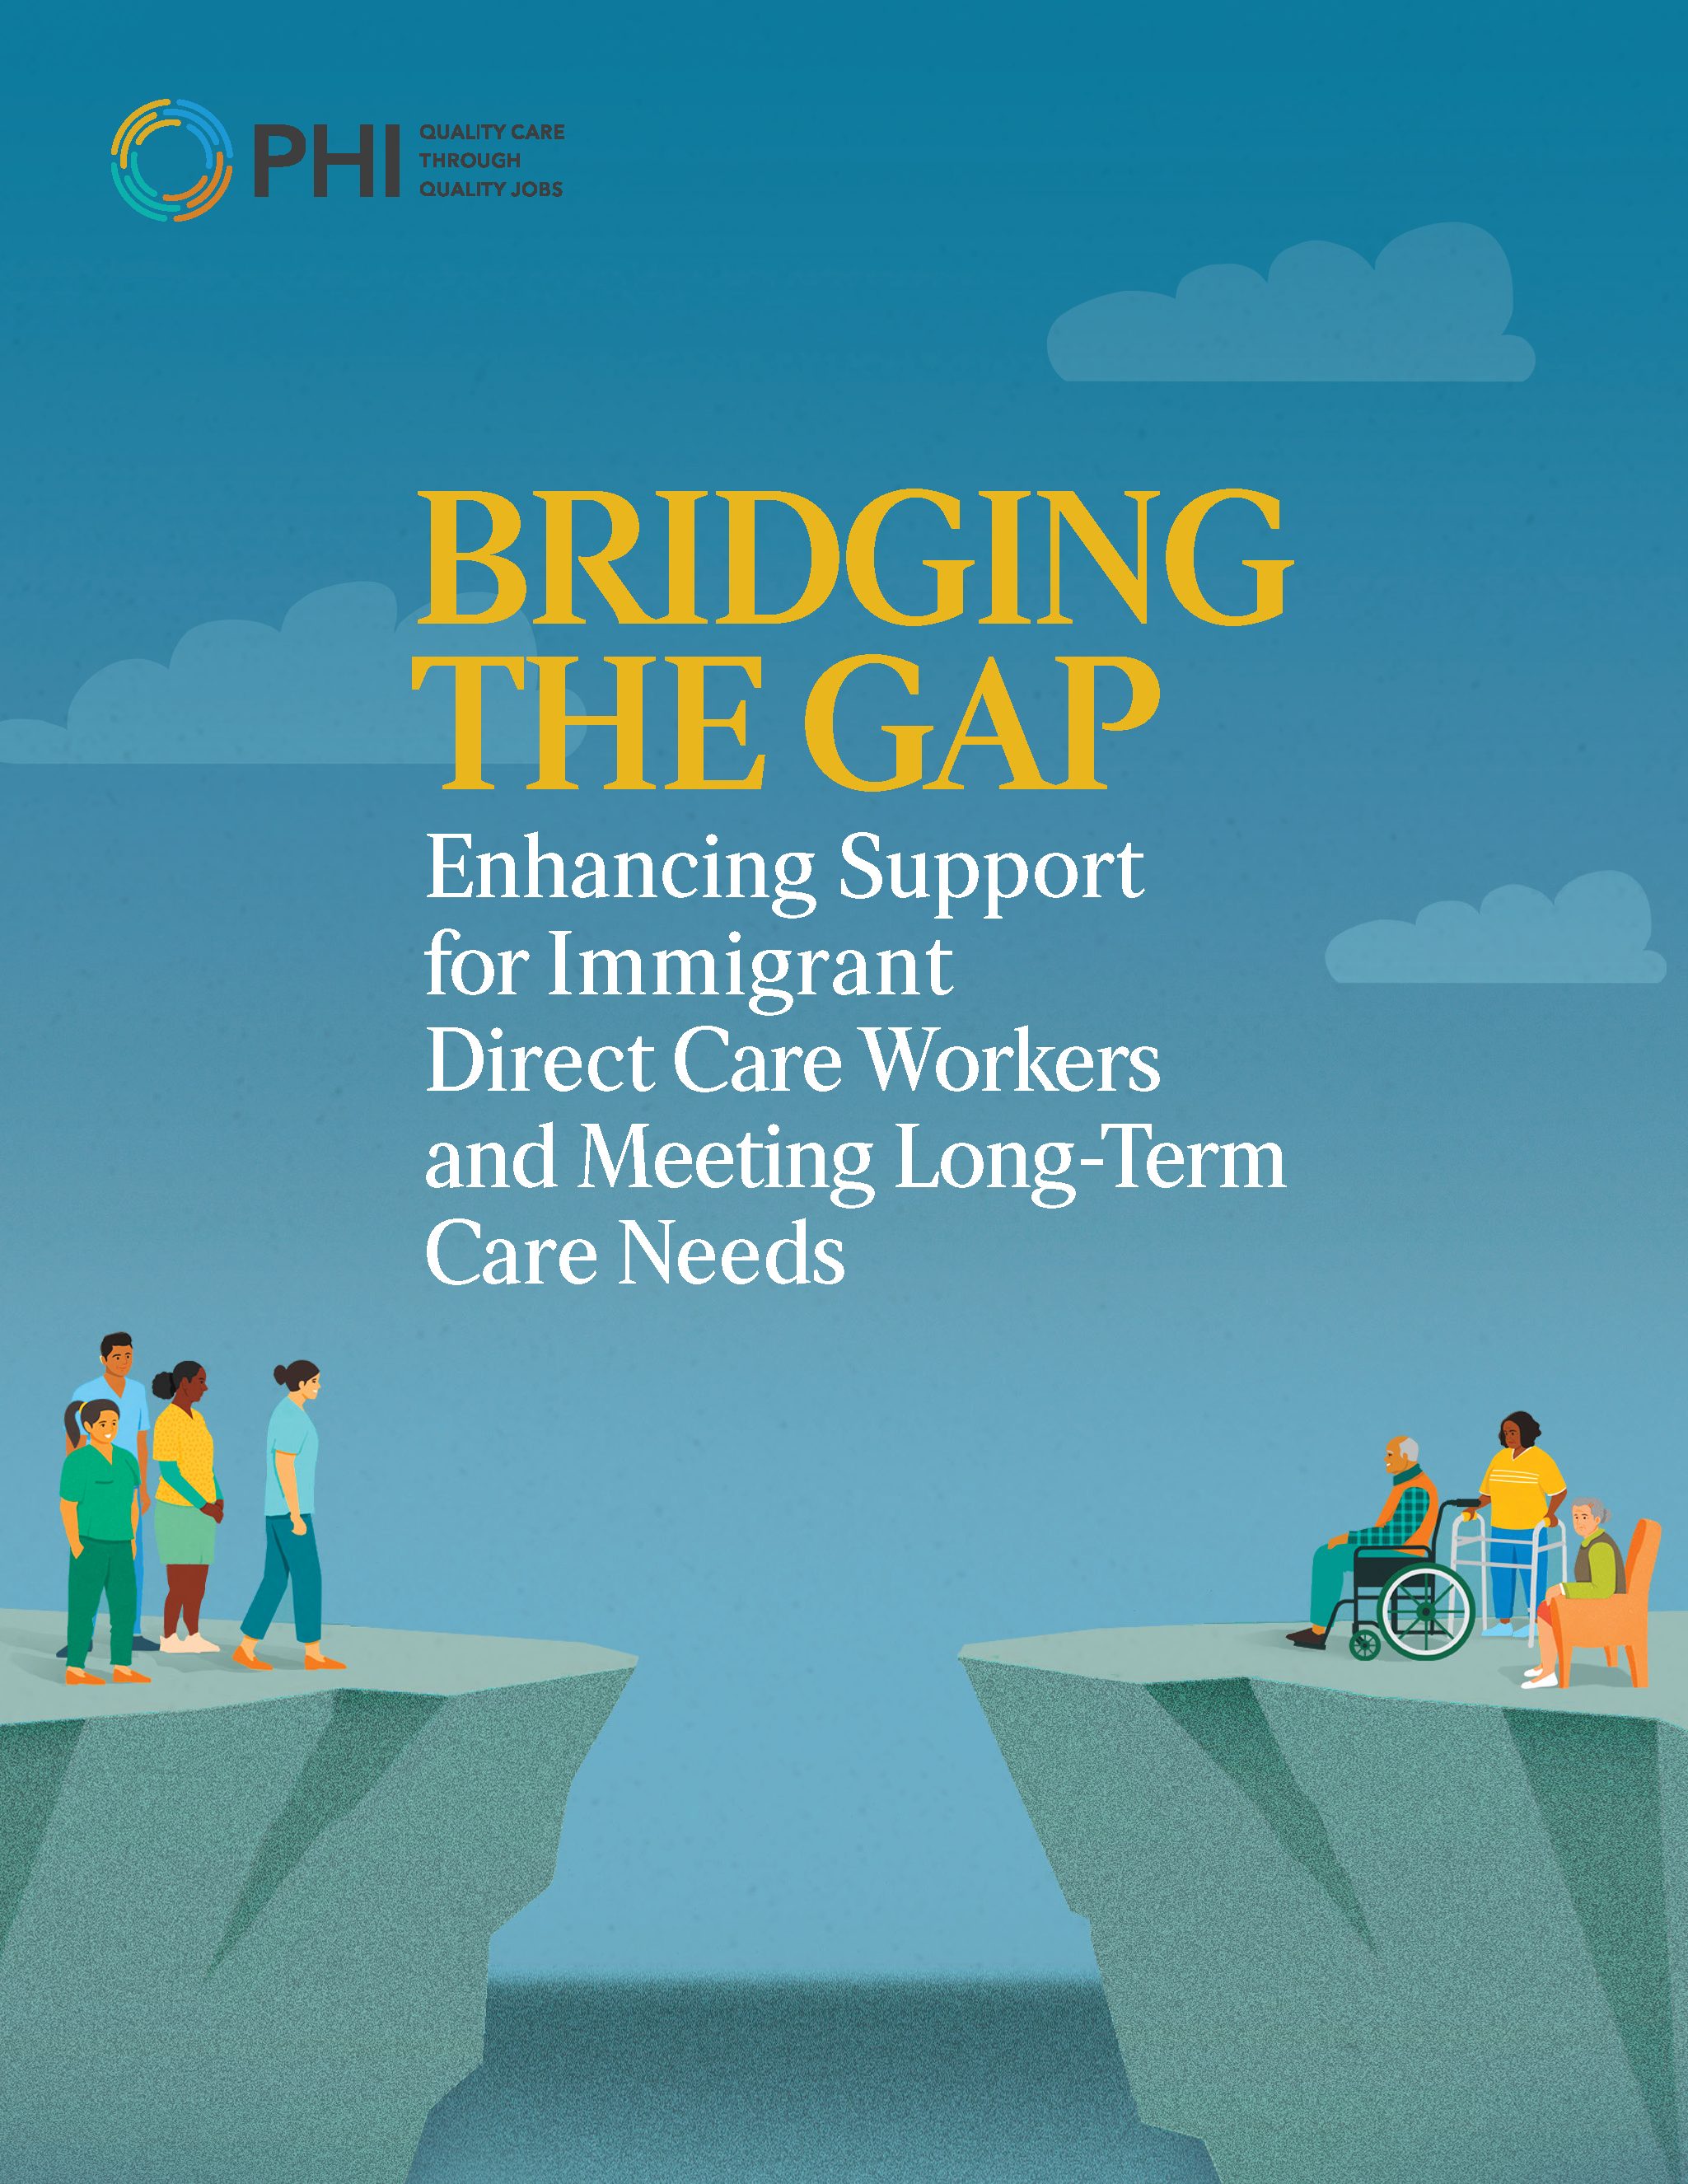 Bridging the Gap - Enhancing Support for Immigrant Direct Care Workers